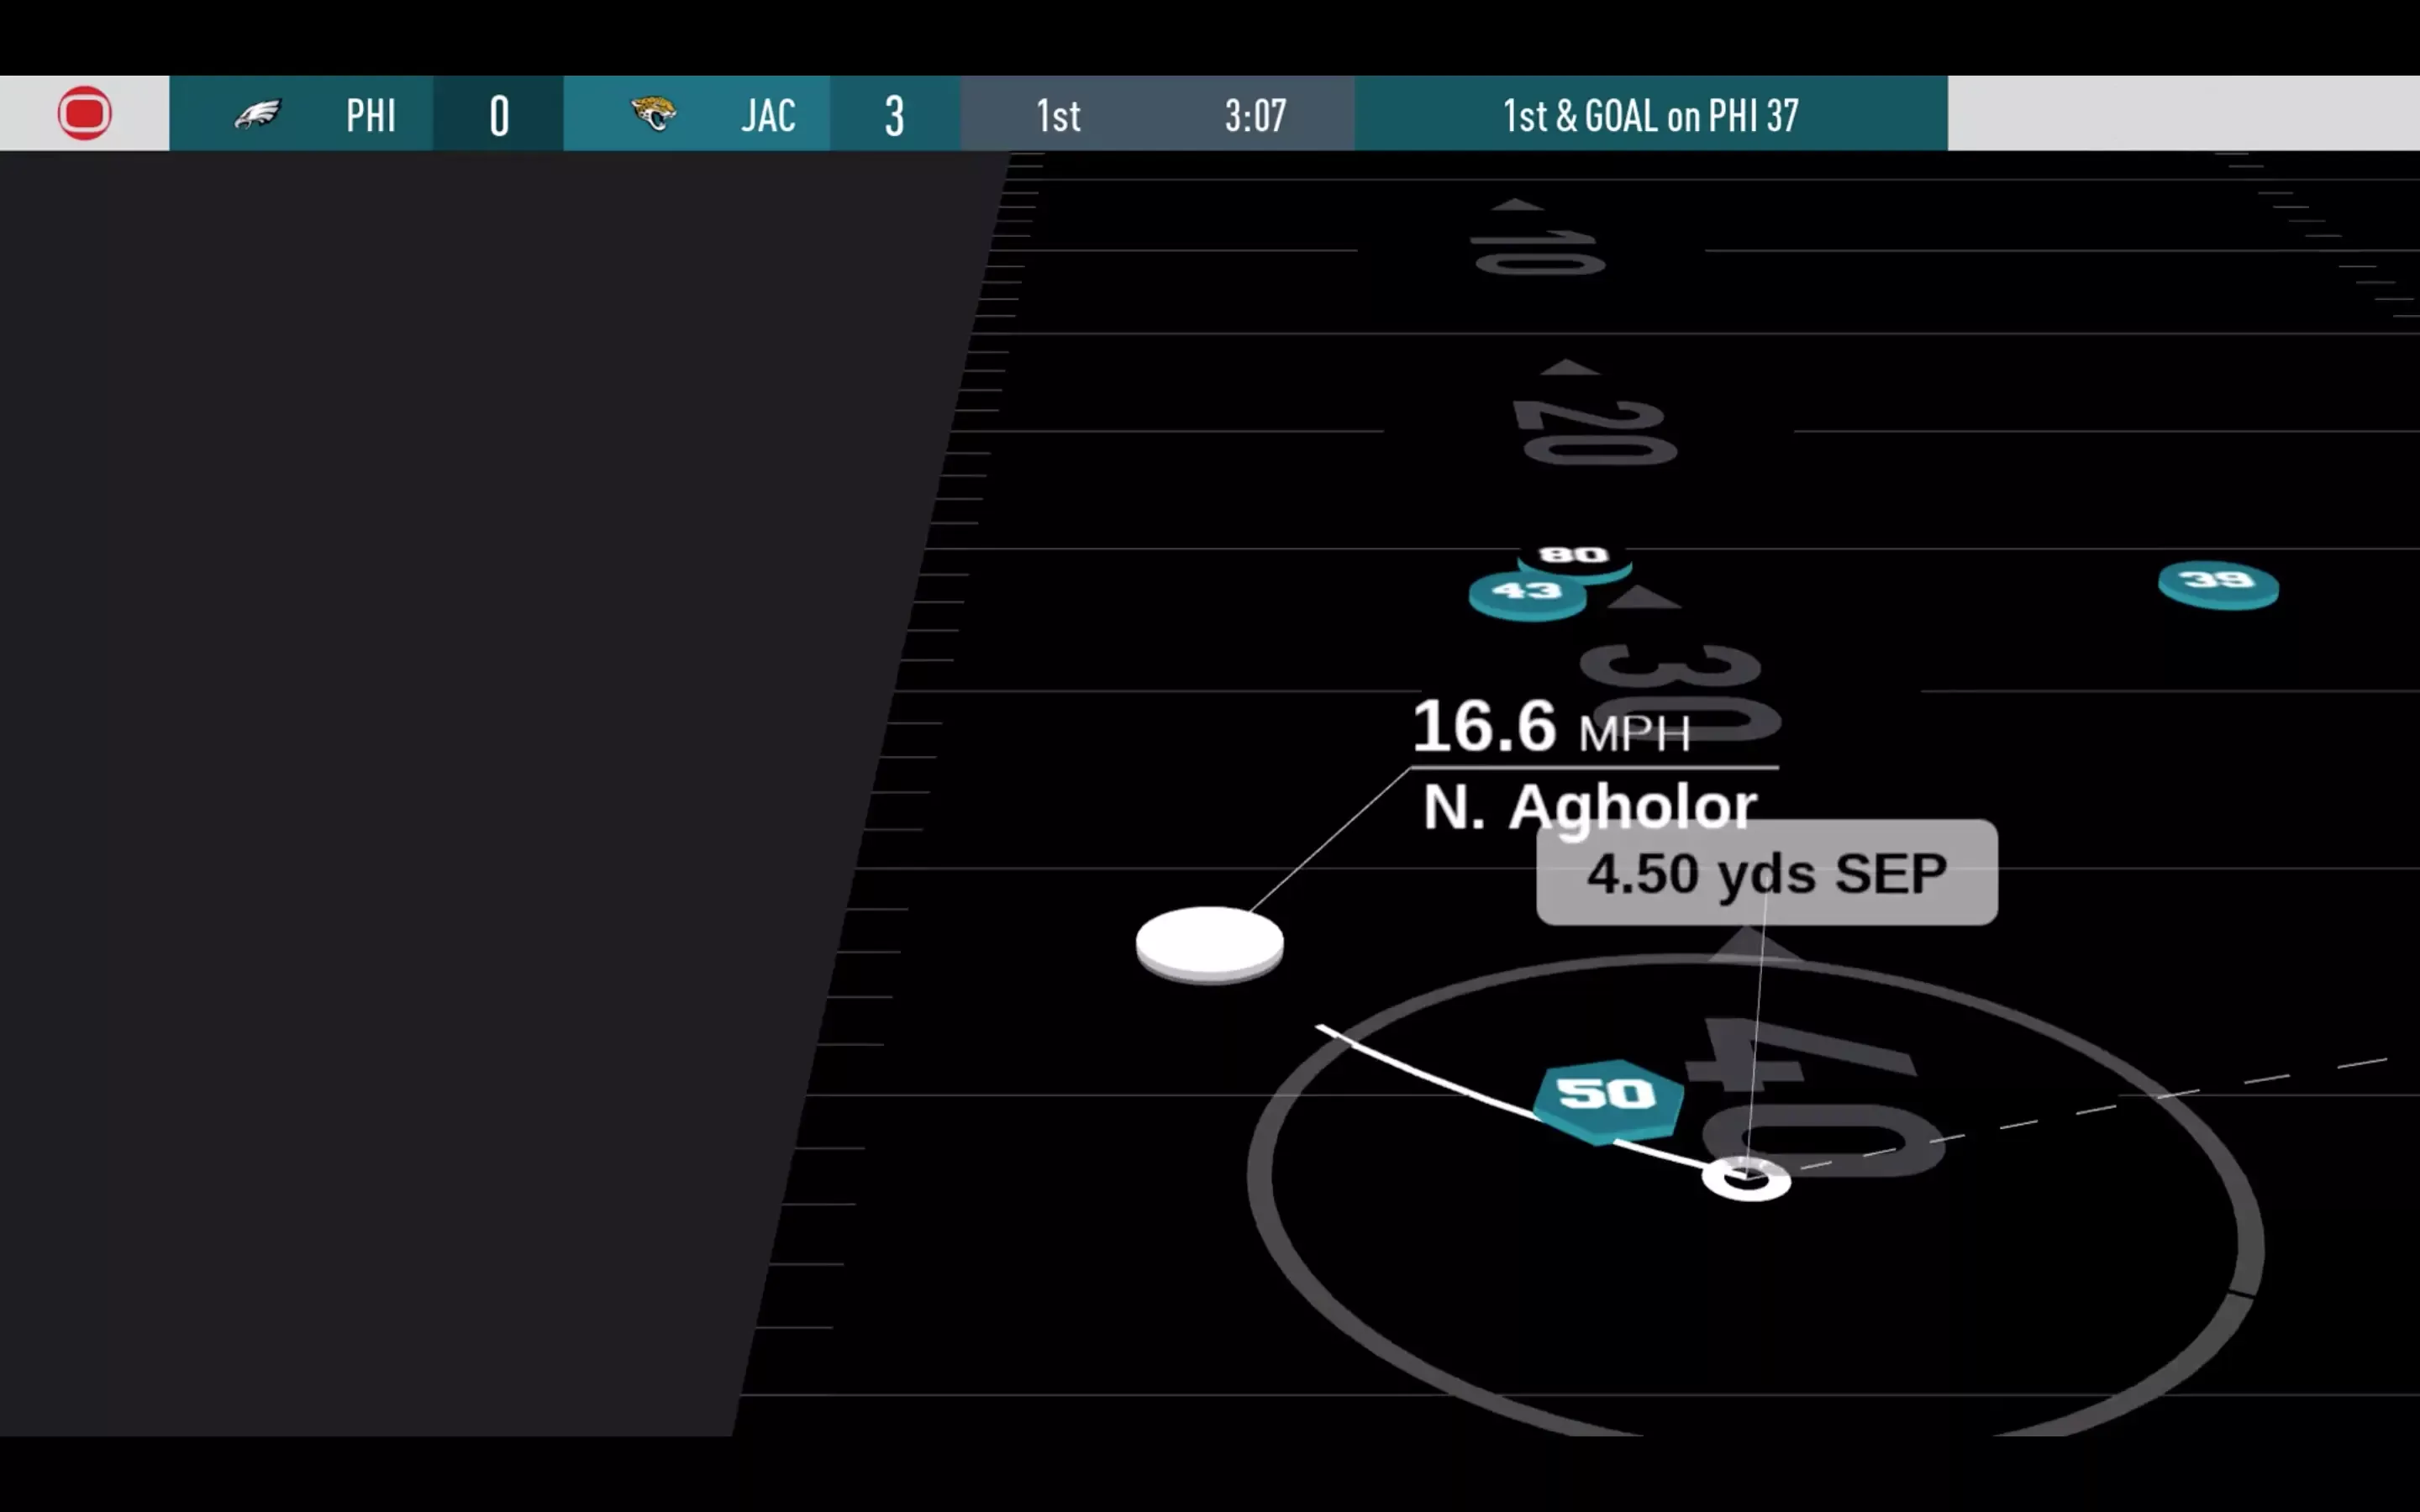 A screenshot of a replay from a Eagles vs Jags game.